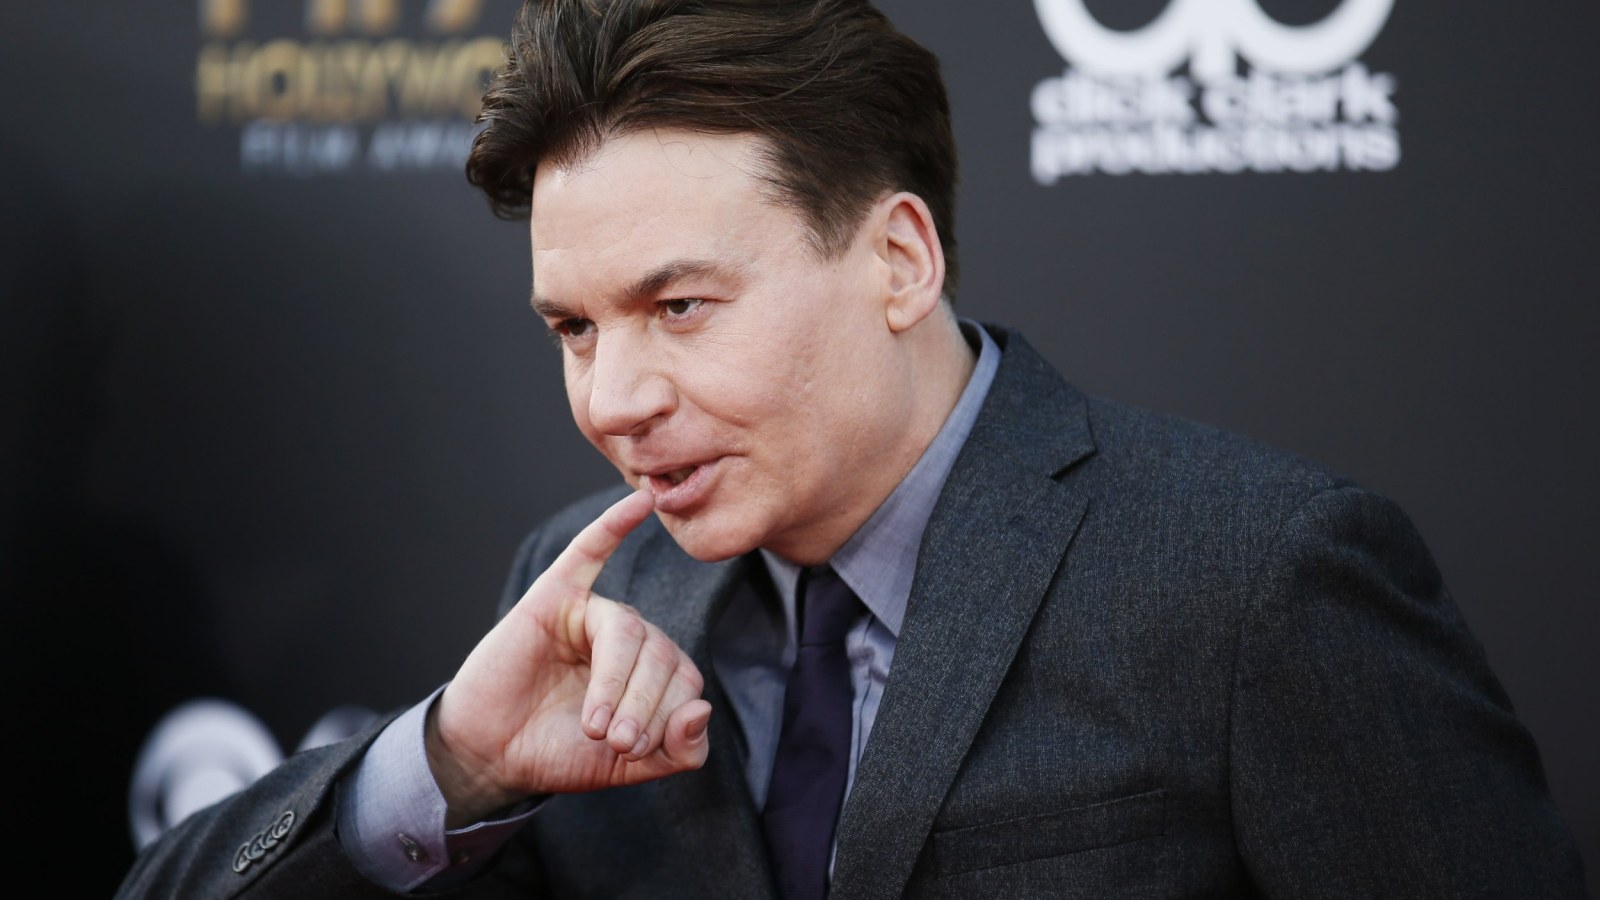 Love Guru, Mike Myers on bodyguard fired for eye contact: "I knew nothing about it"